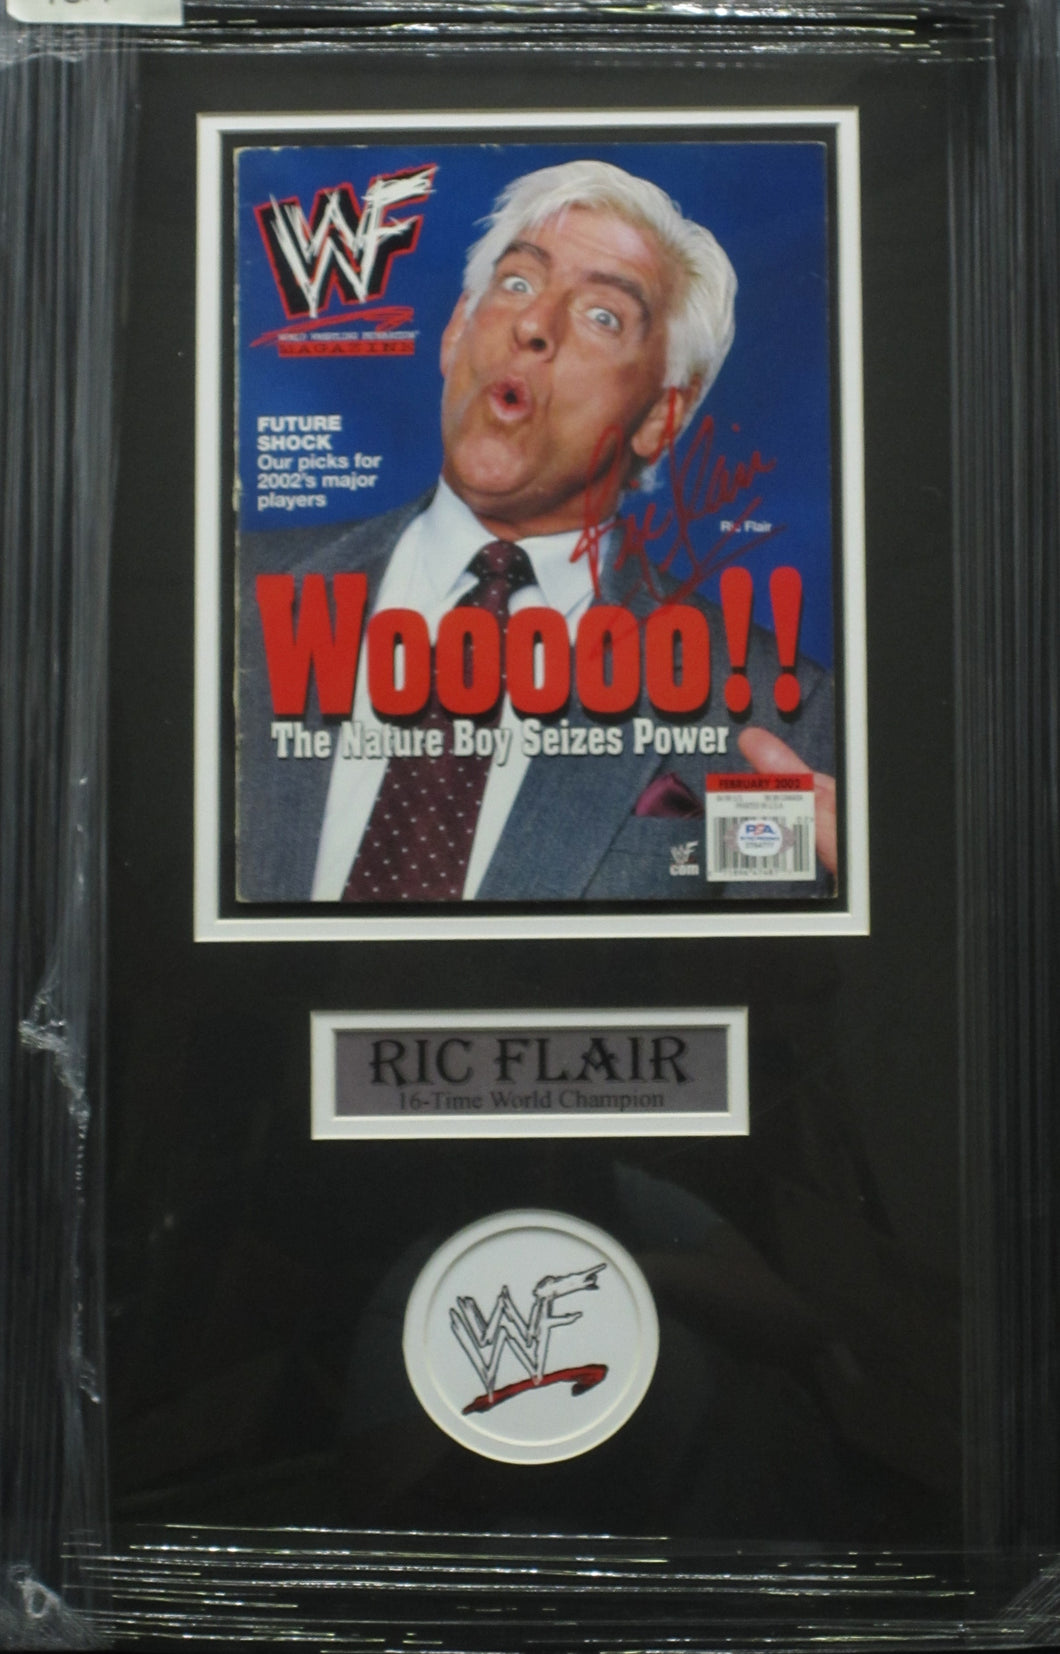 American Professional Wrestler Ric Flair Signed 2002 WWF Magazine Framed & Matted with PSA COA